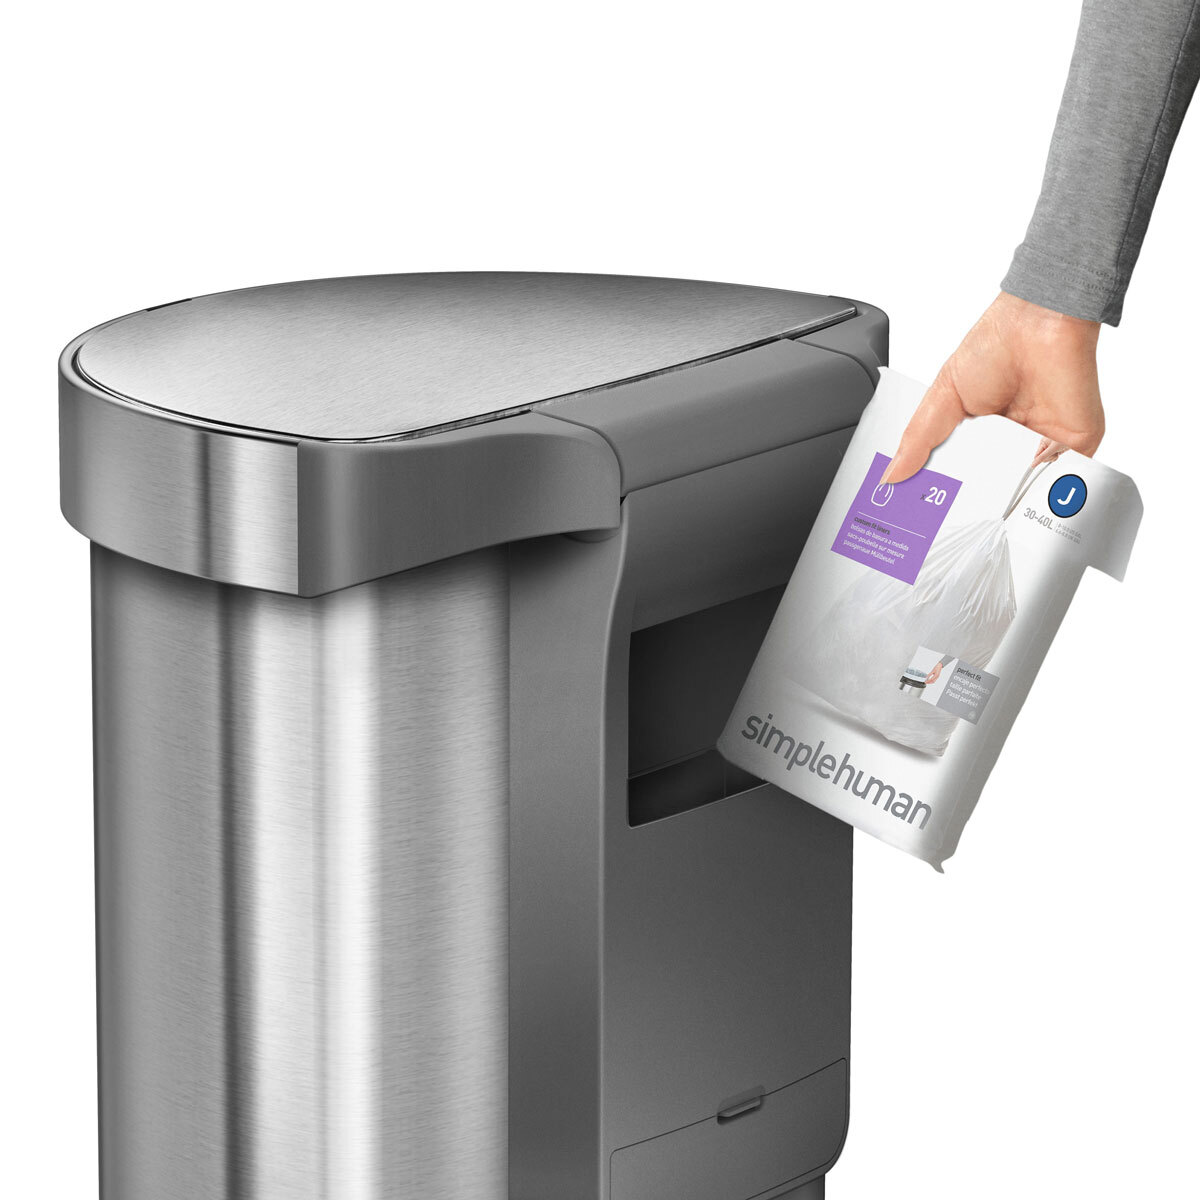 Cut out image of large bin showcasing the bin liner container